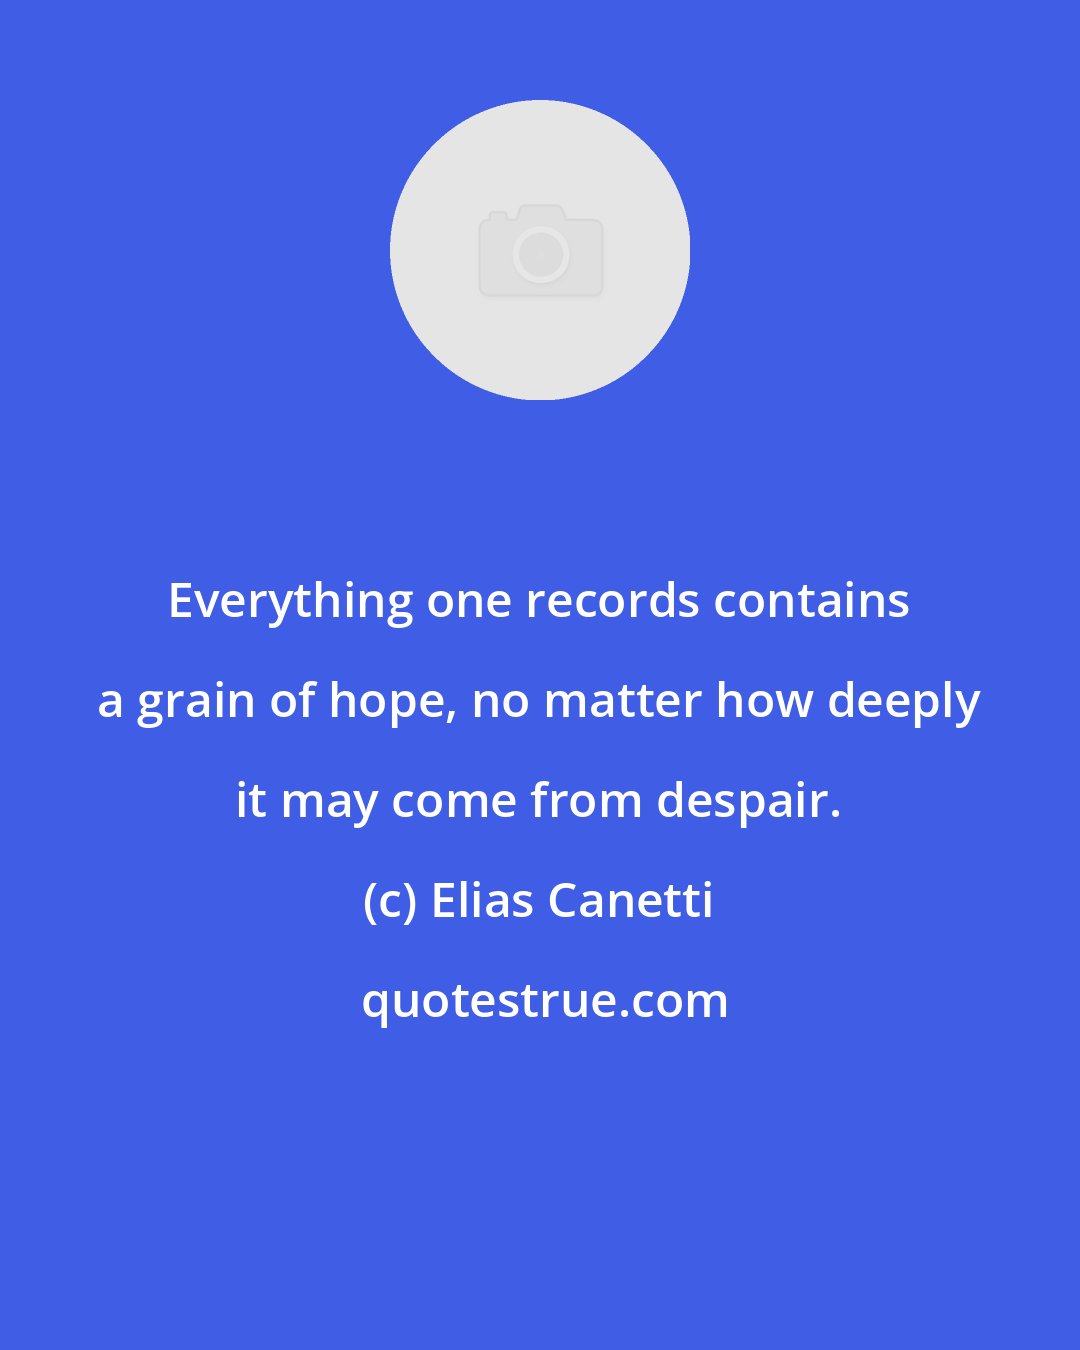 Elias Canetti: Everything one records contains a grain of hope, no matter how deeply it may come from despair.